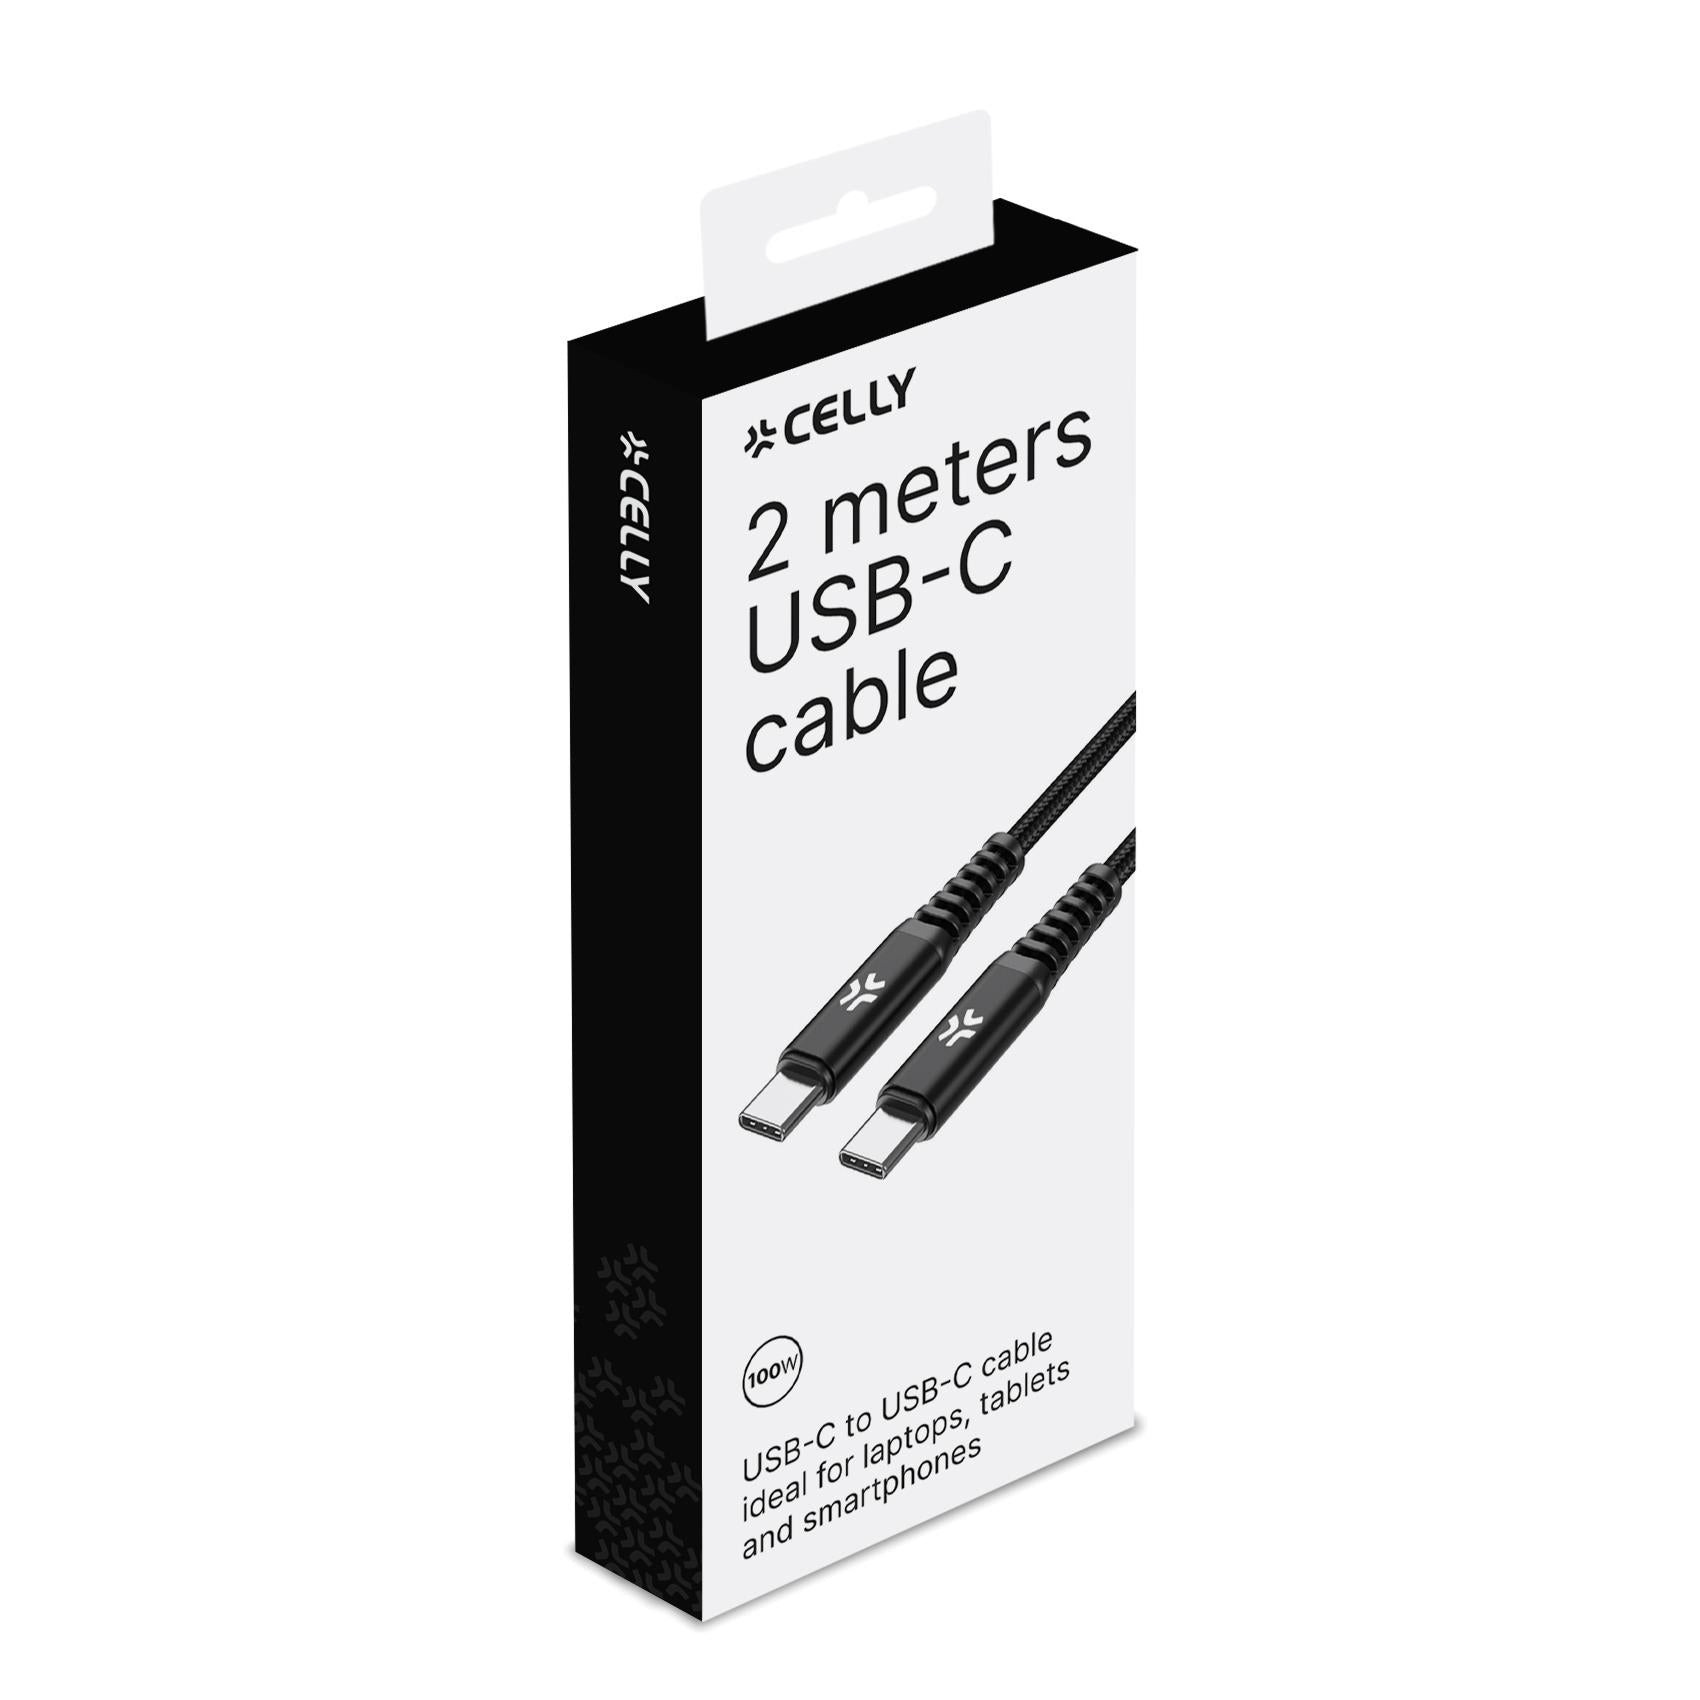 Celly USBCUSBC100W - USB-C to USB-C 2 Meter Cable 100W